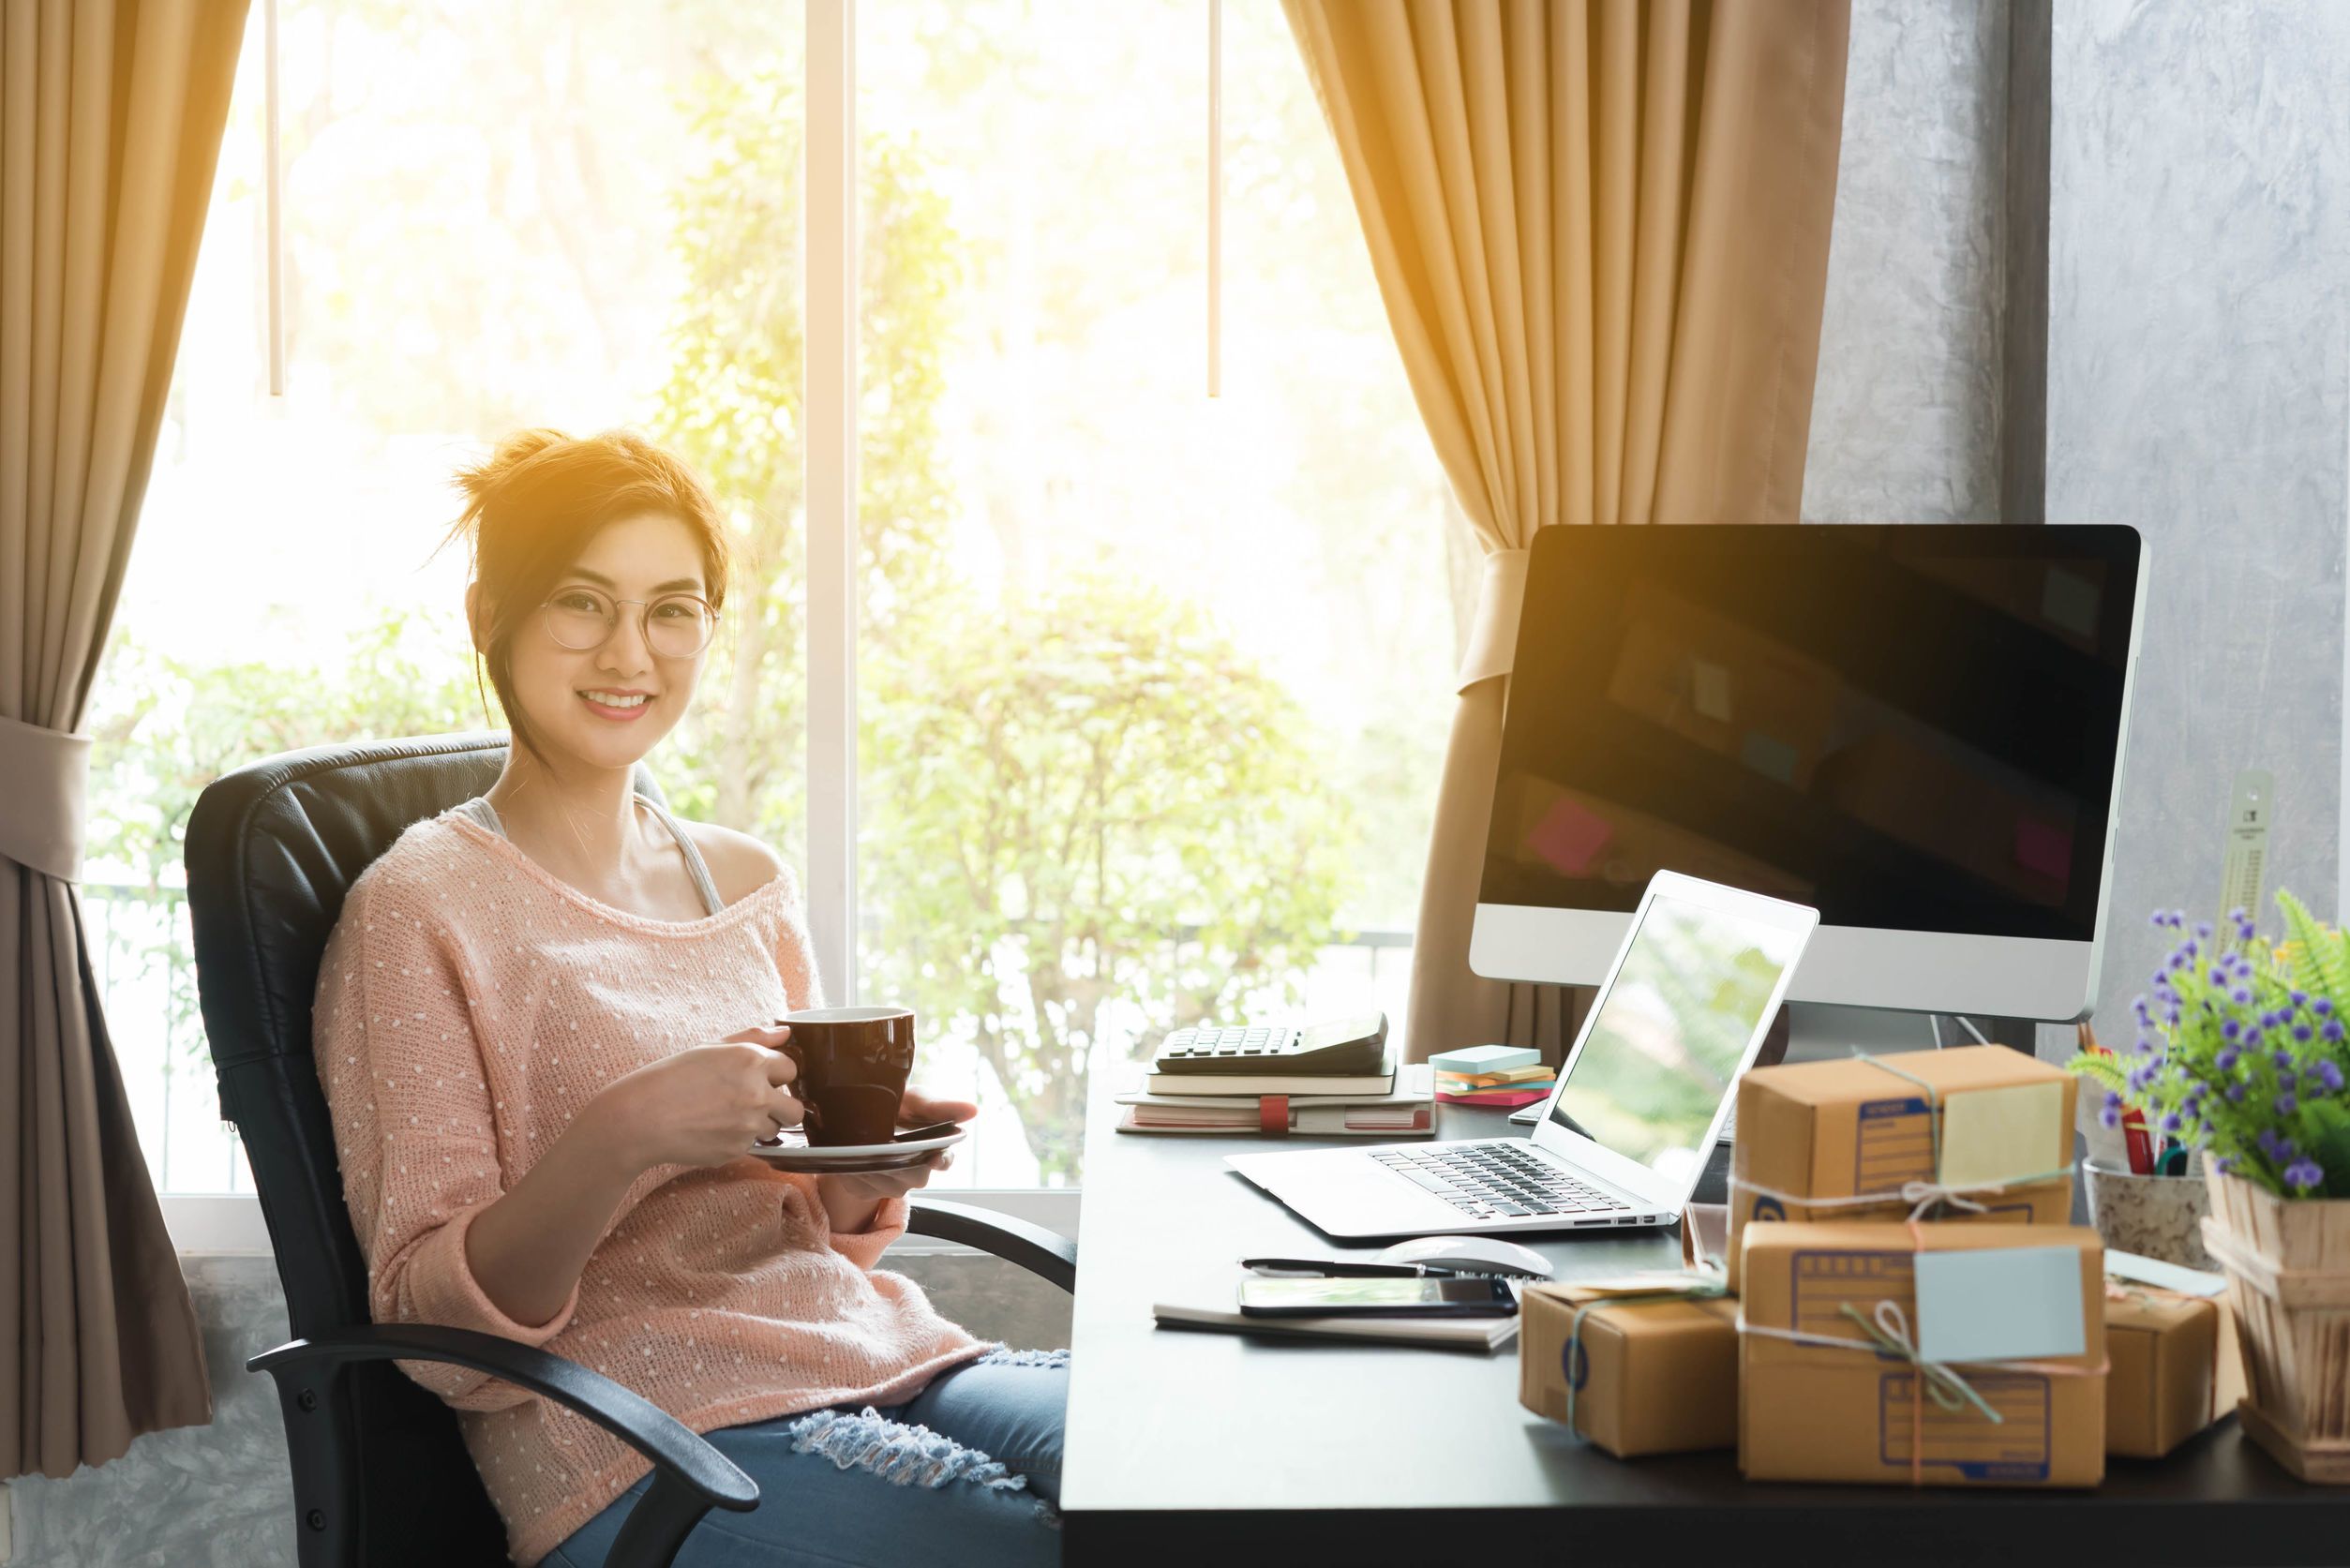 Top 20 Do's and Don'ts for Working from Home during COVID-19